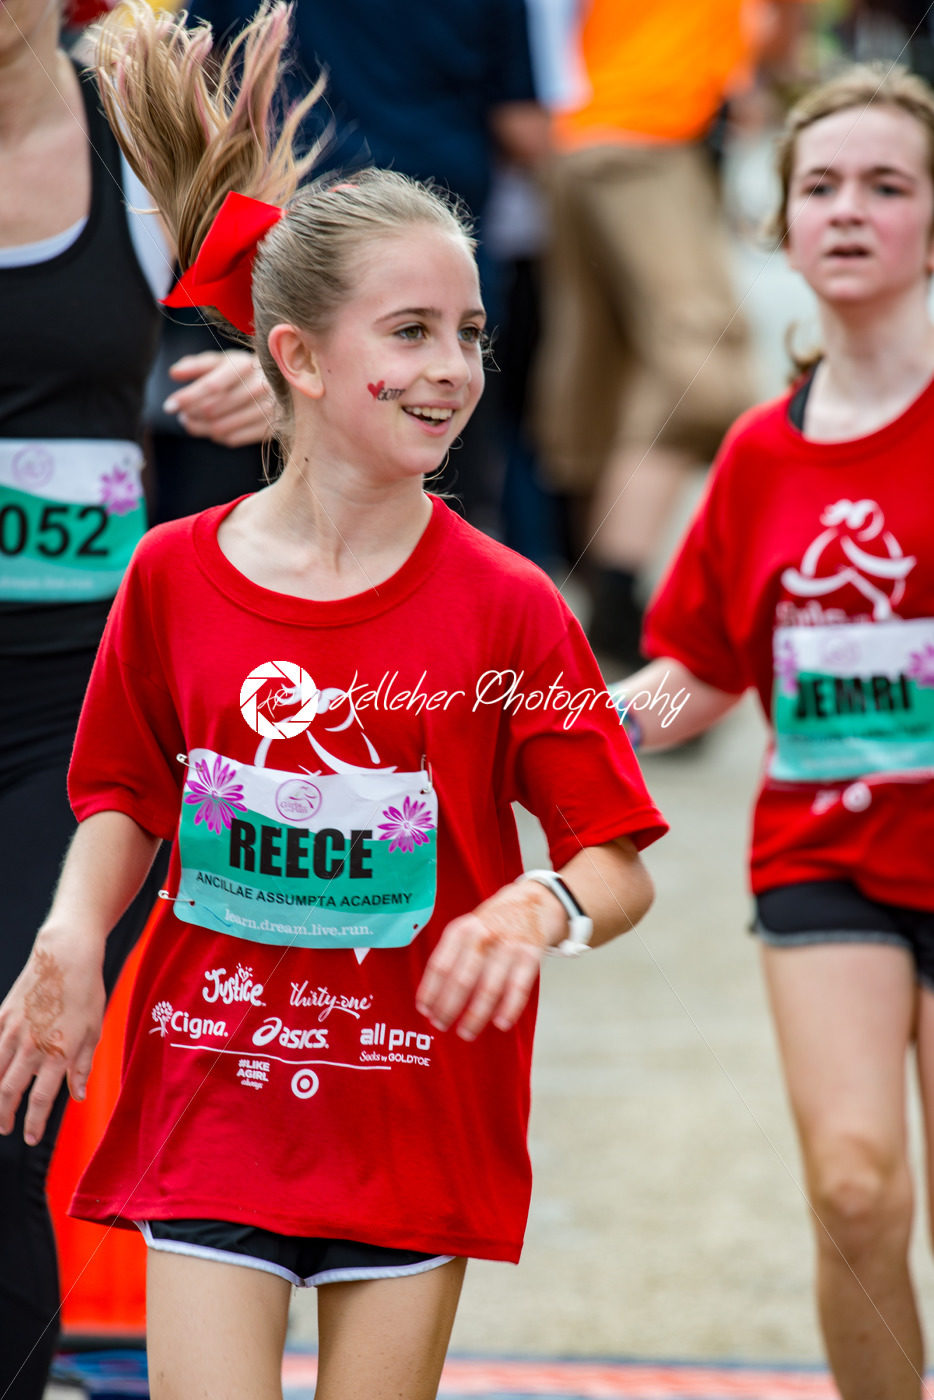 Blue Bell, PA -May 20, 2018: Girls on the Run 5k Finish - Kelleher Photography Store